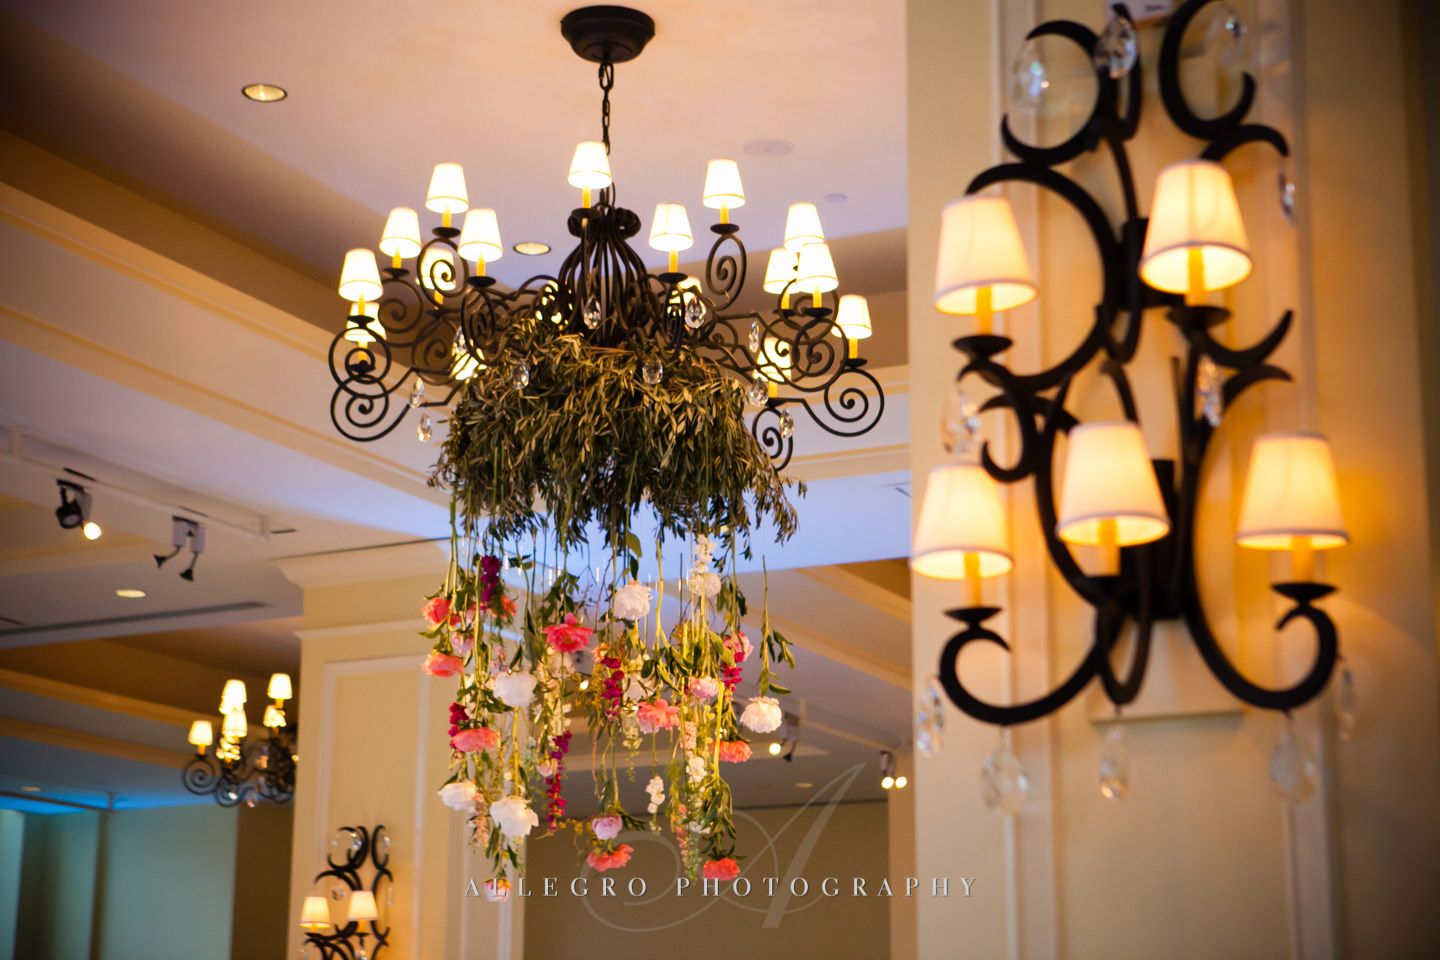 floral chandelier with pink white green peonies dripping down- photo by allegro photography